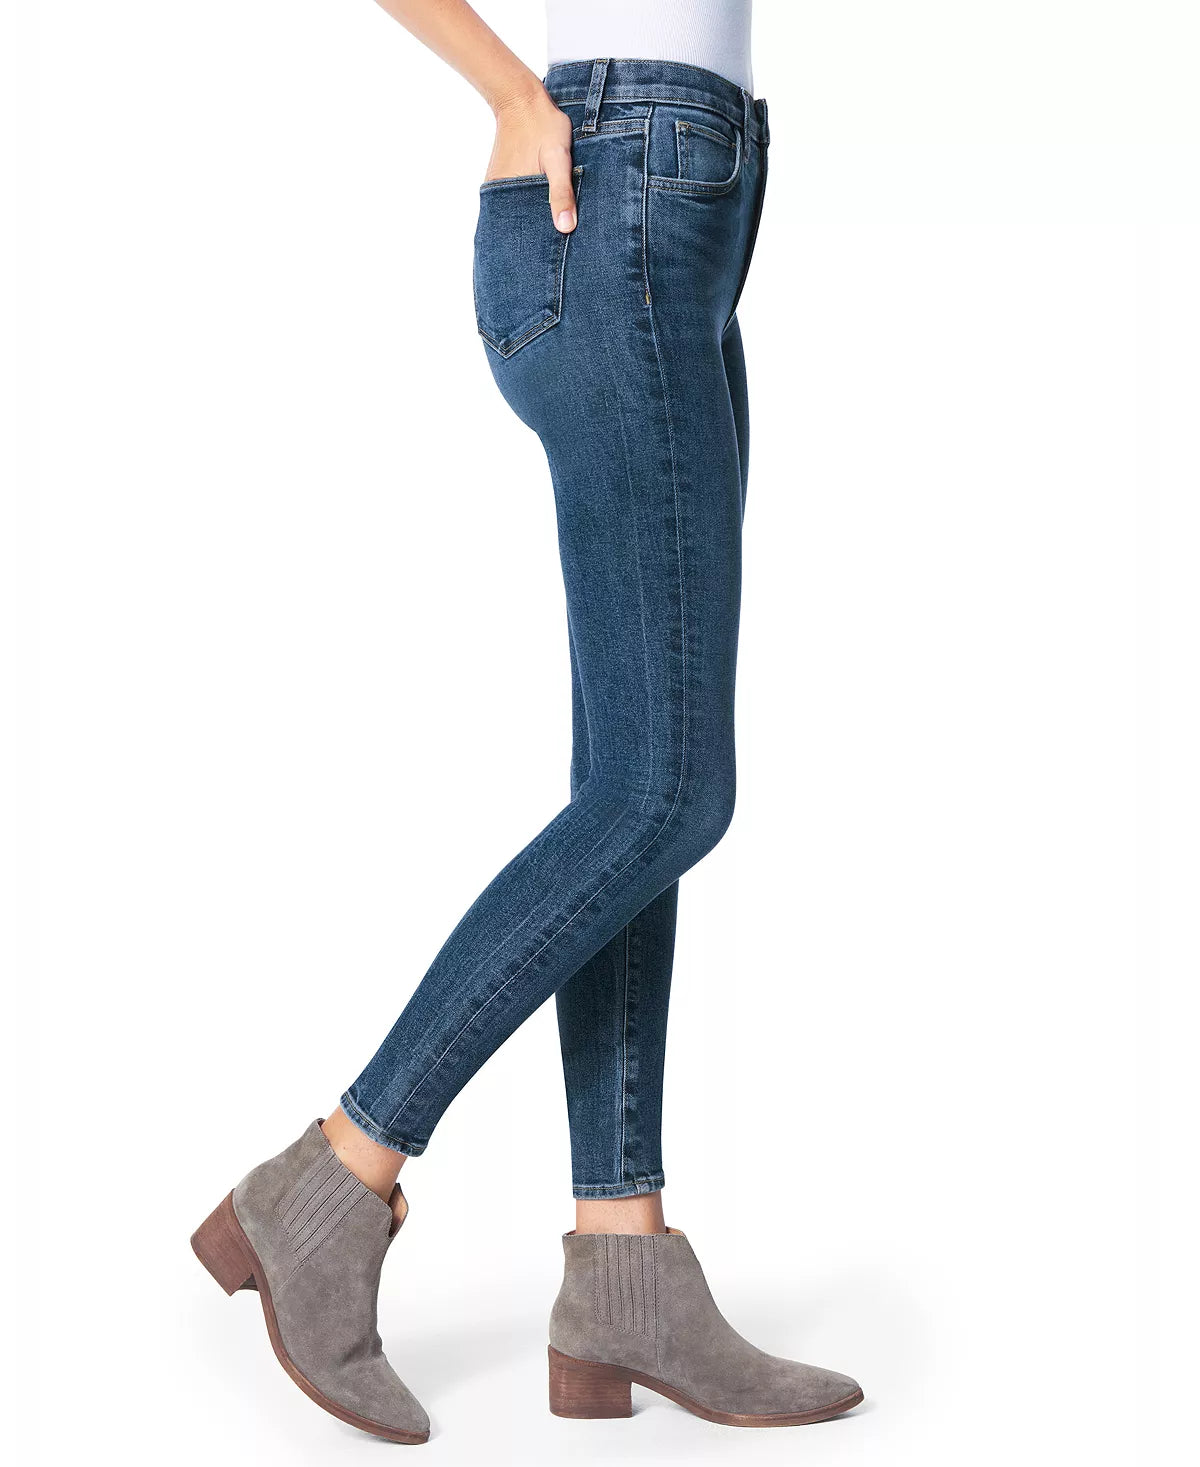 Joe's Jeans The Charlie High Rise Ankle Skinny Jeans